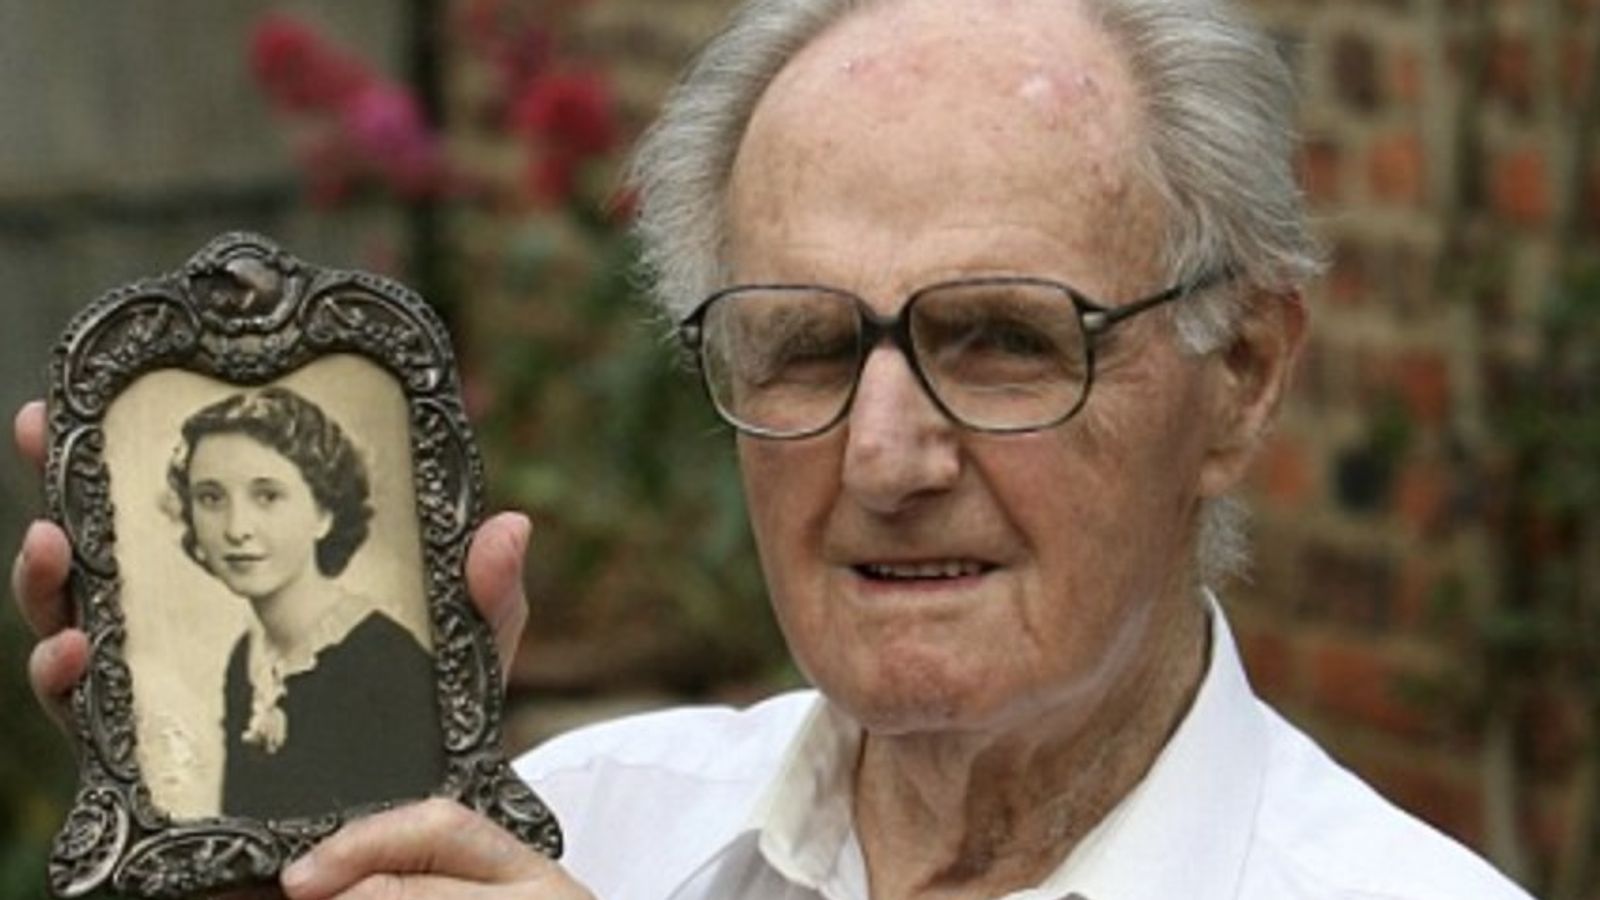 D-Day: 'An act of love saved my grandpop' - how a framed photo of veteran’s wife saved his life